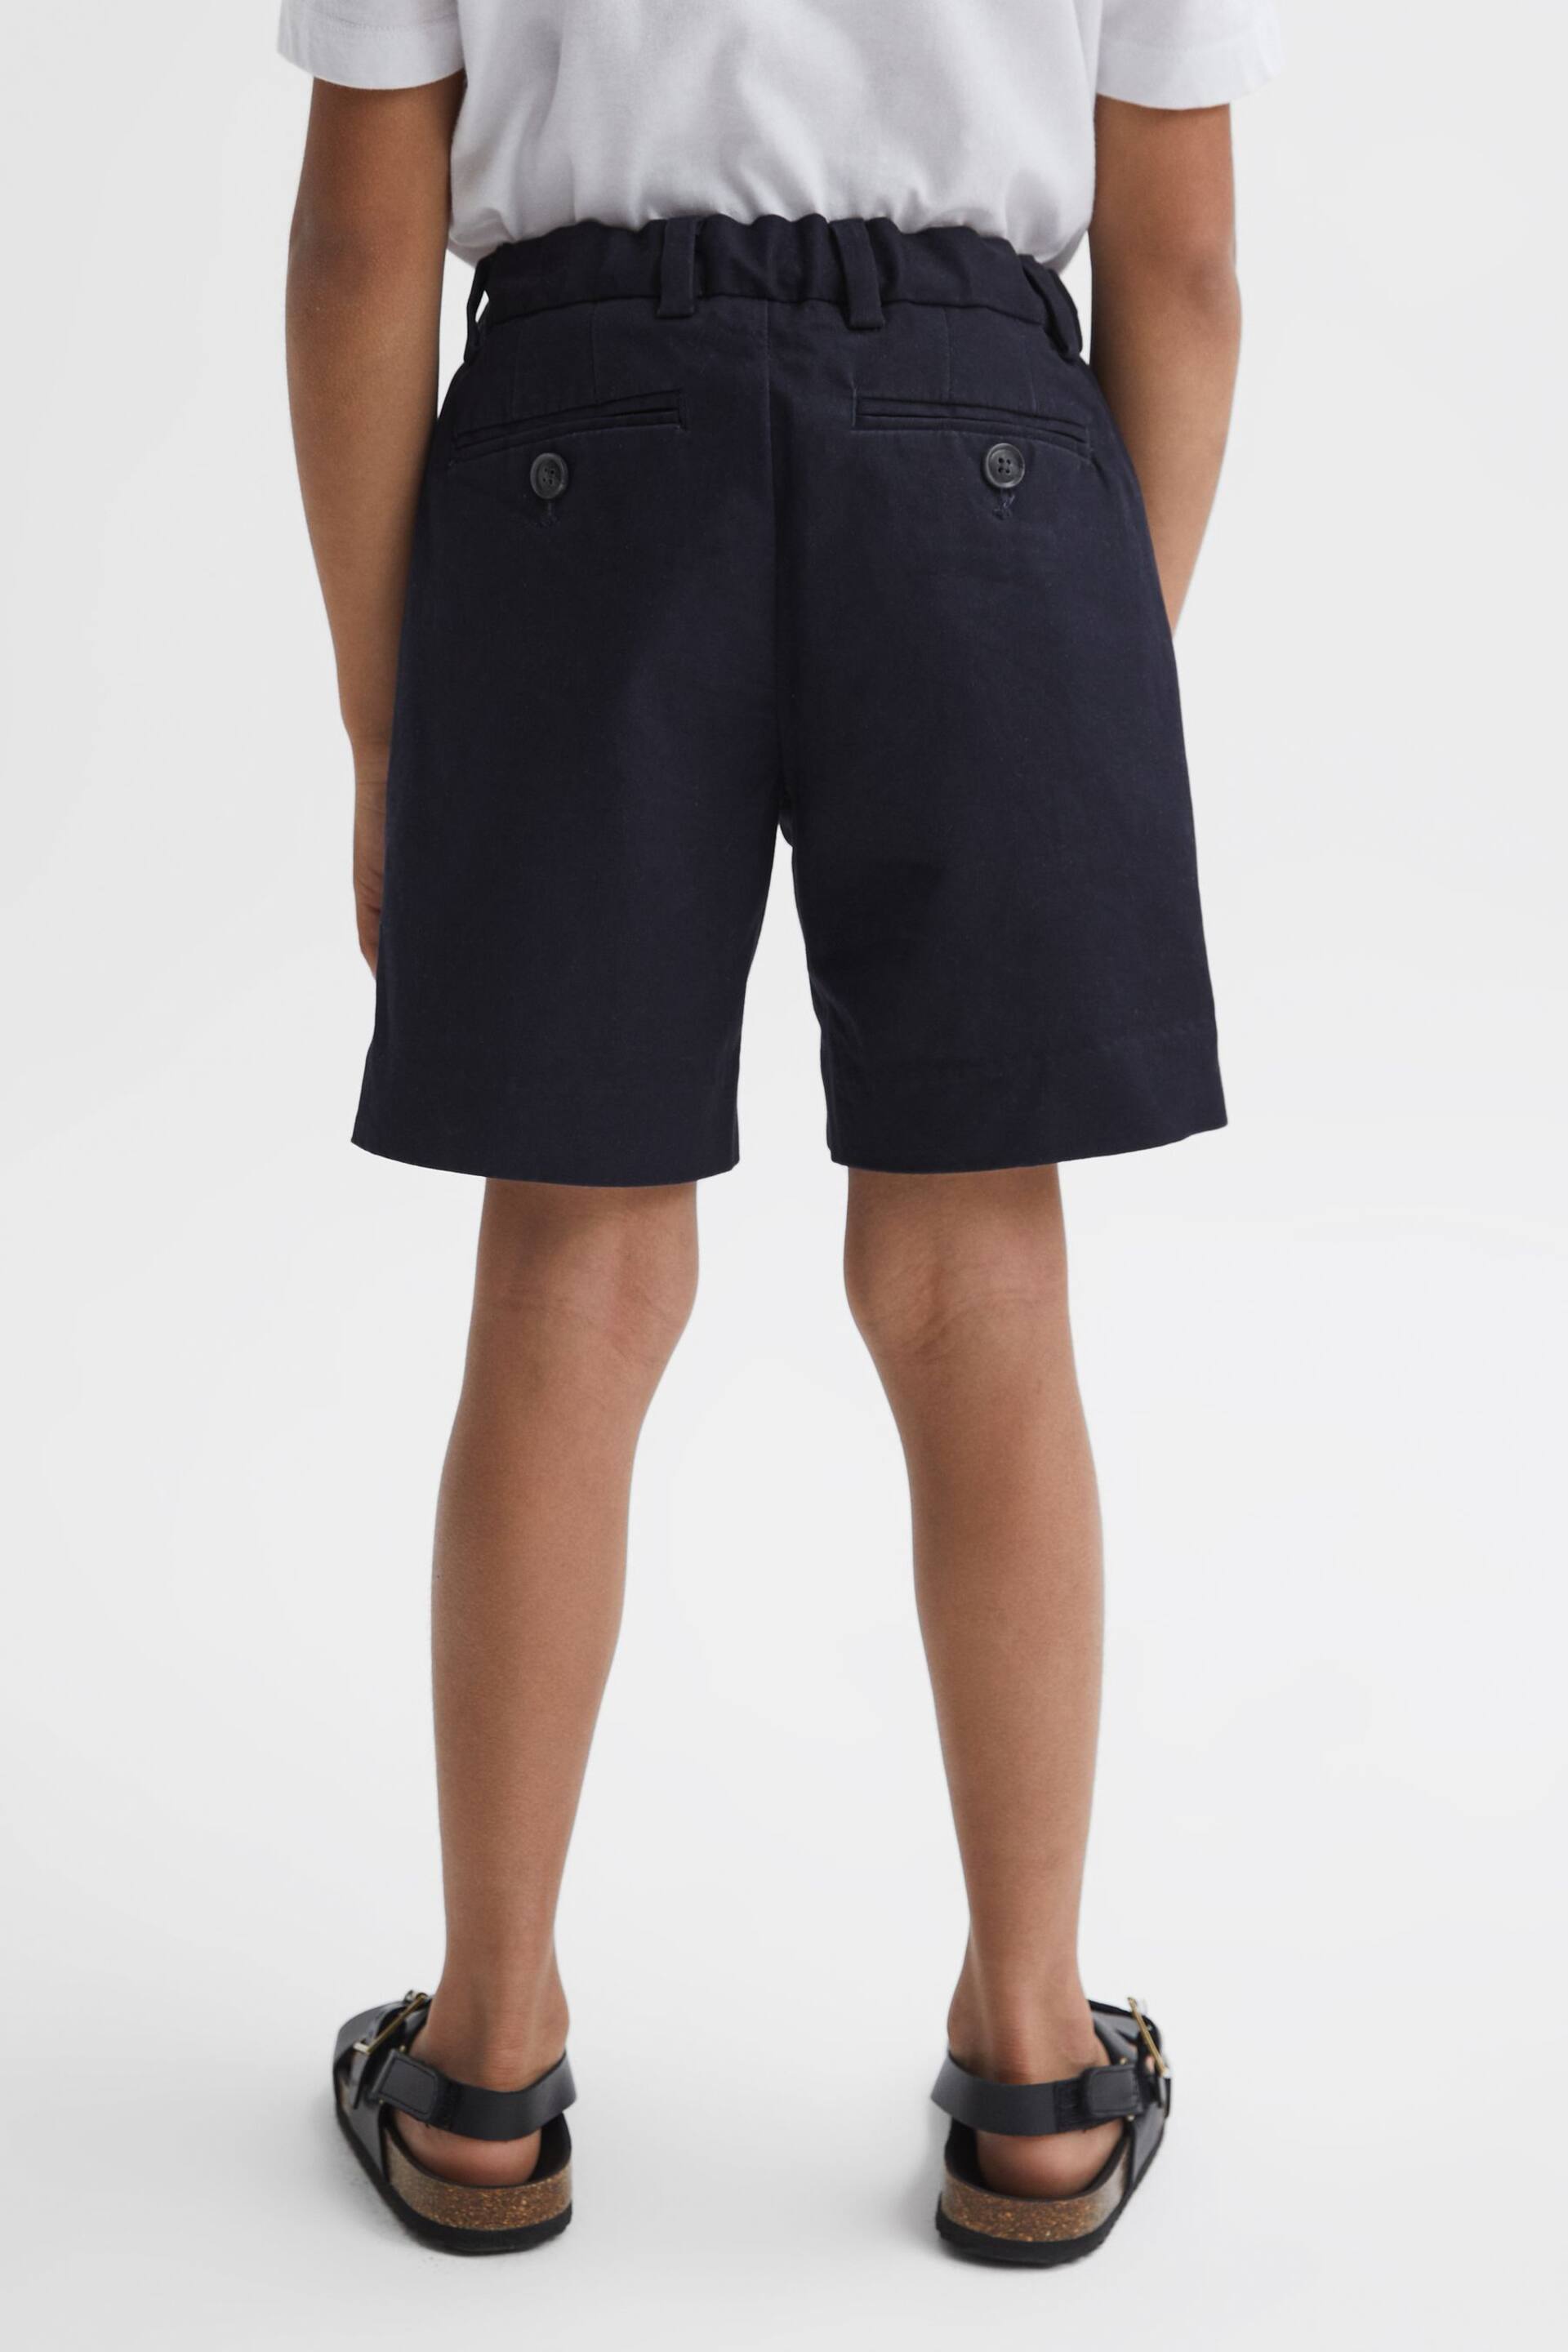 Reiss Navy Wicket Teen Casual Chino Shorts - Image 4 of 5